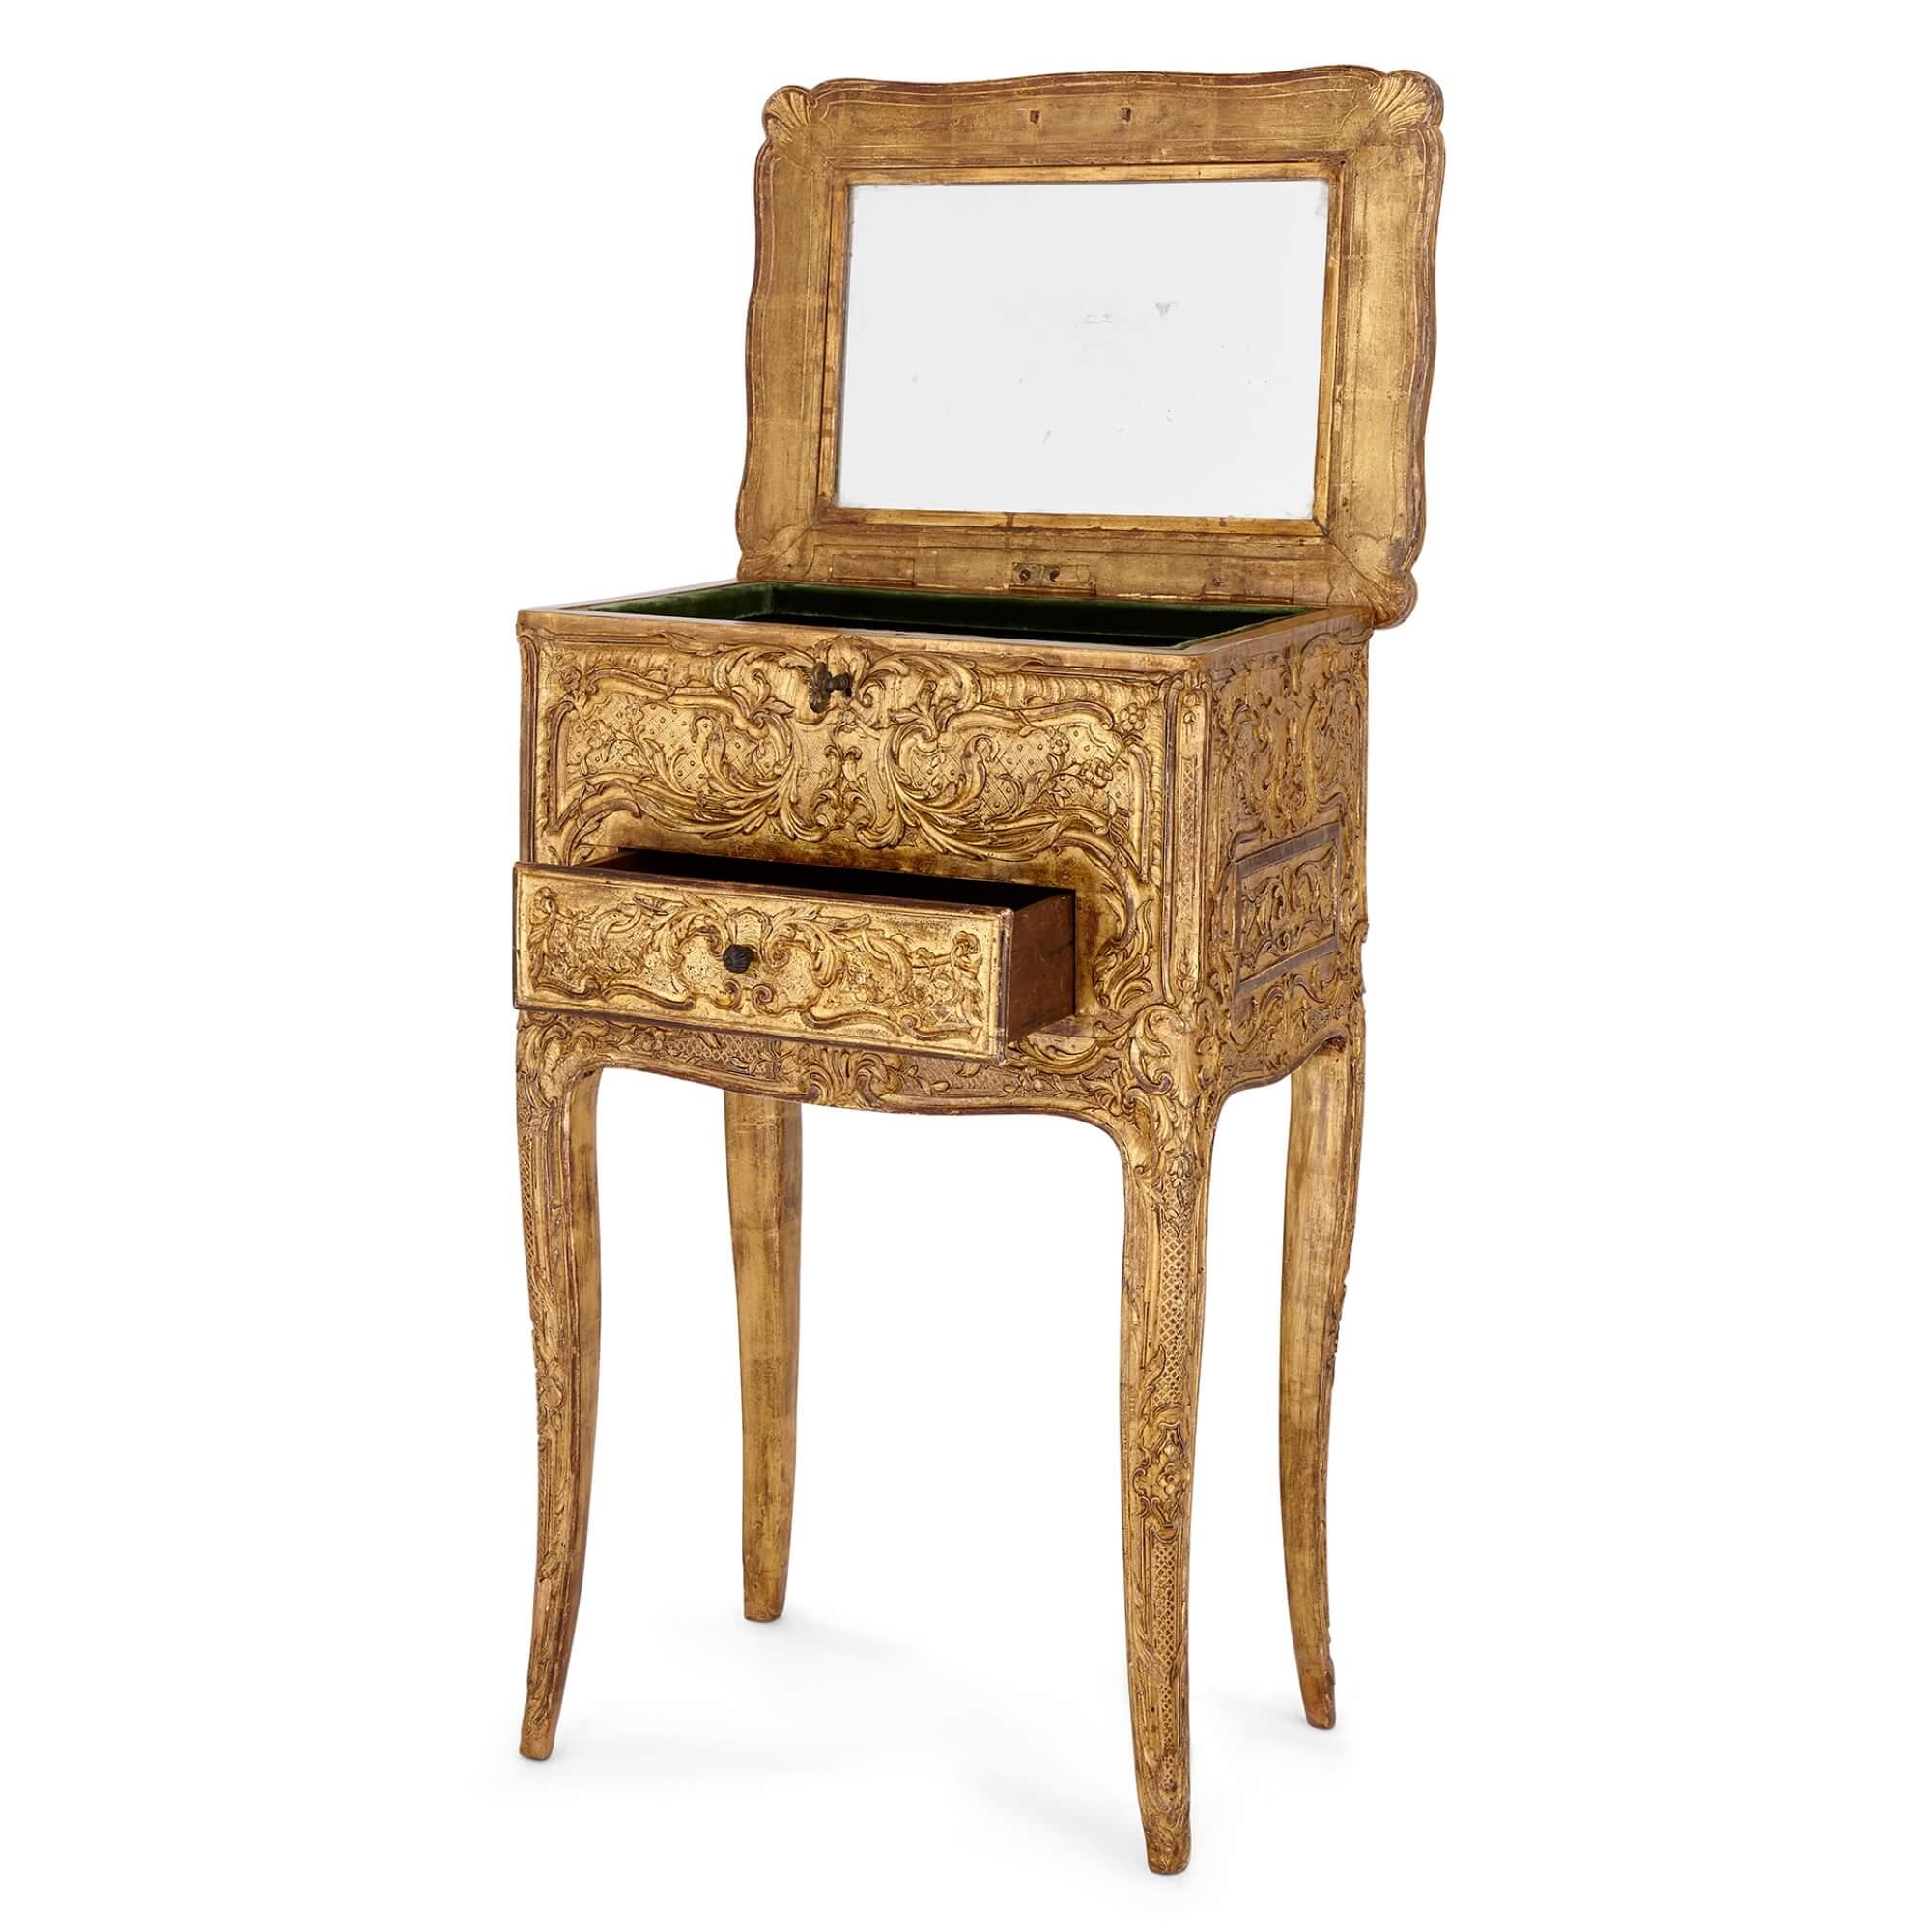 Regency French Régence Period Carved Giltwood Table with Mirror, Early 18th Century For Sale